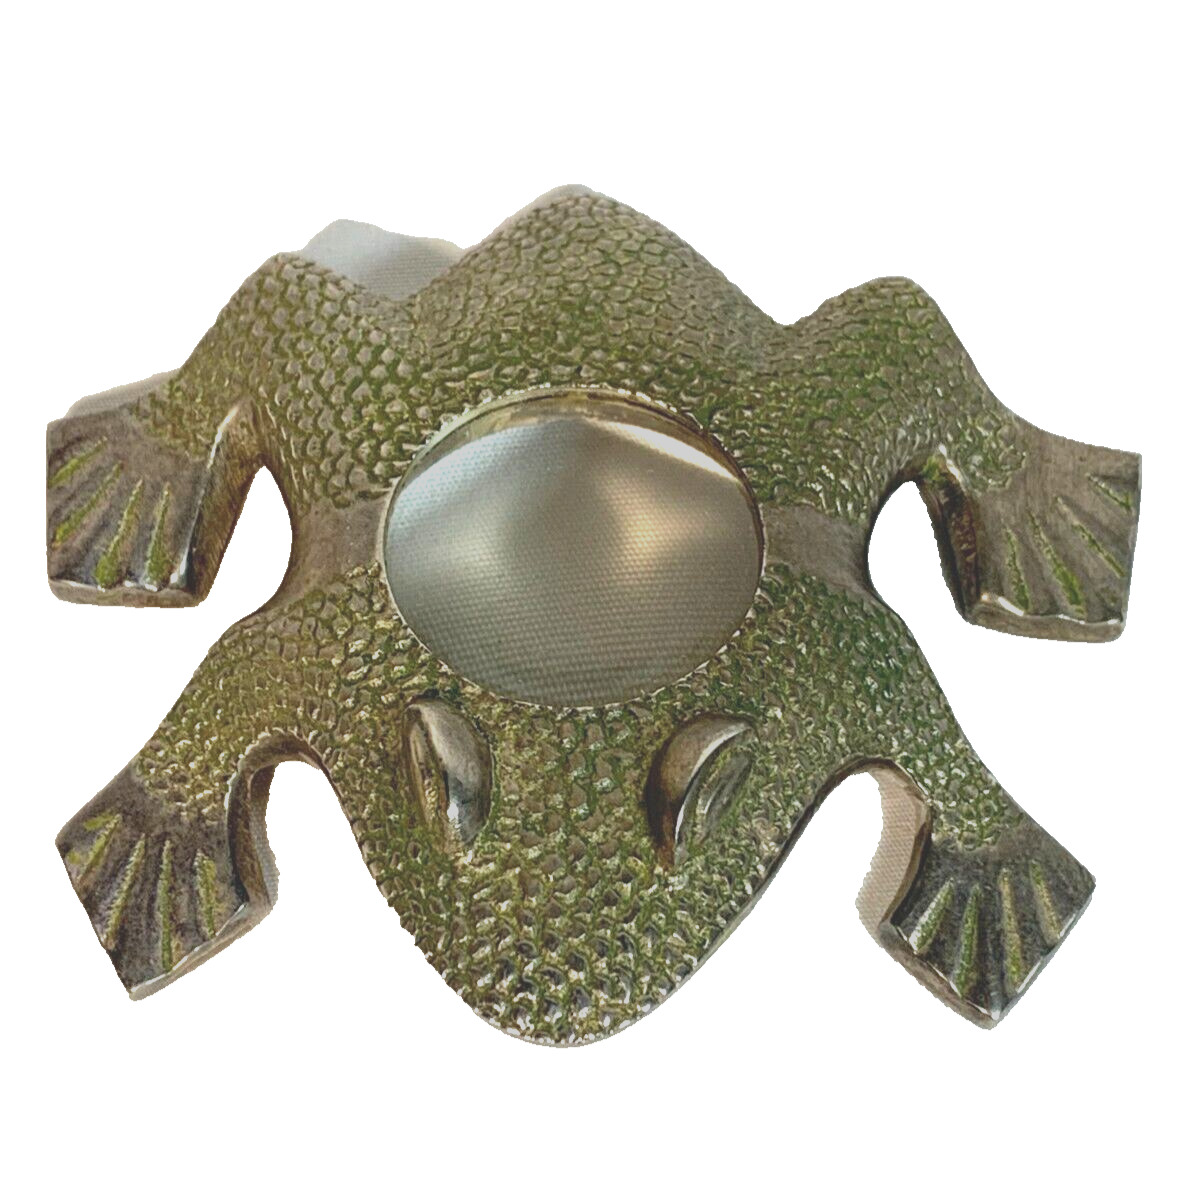 Frog Paperweight Brass & Magnifying Glass Dual Purpose Desk Tool